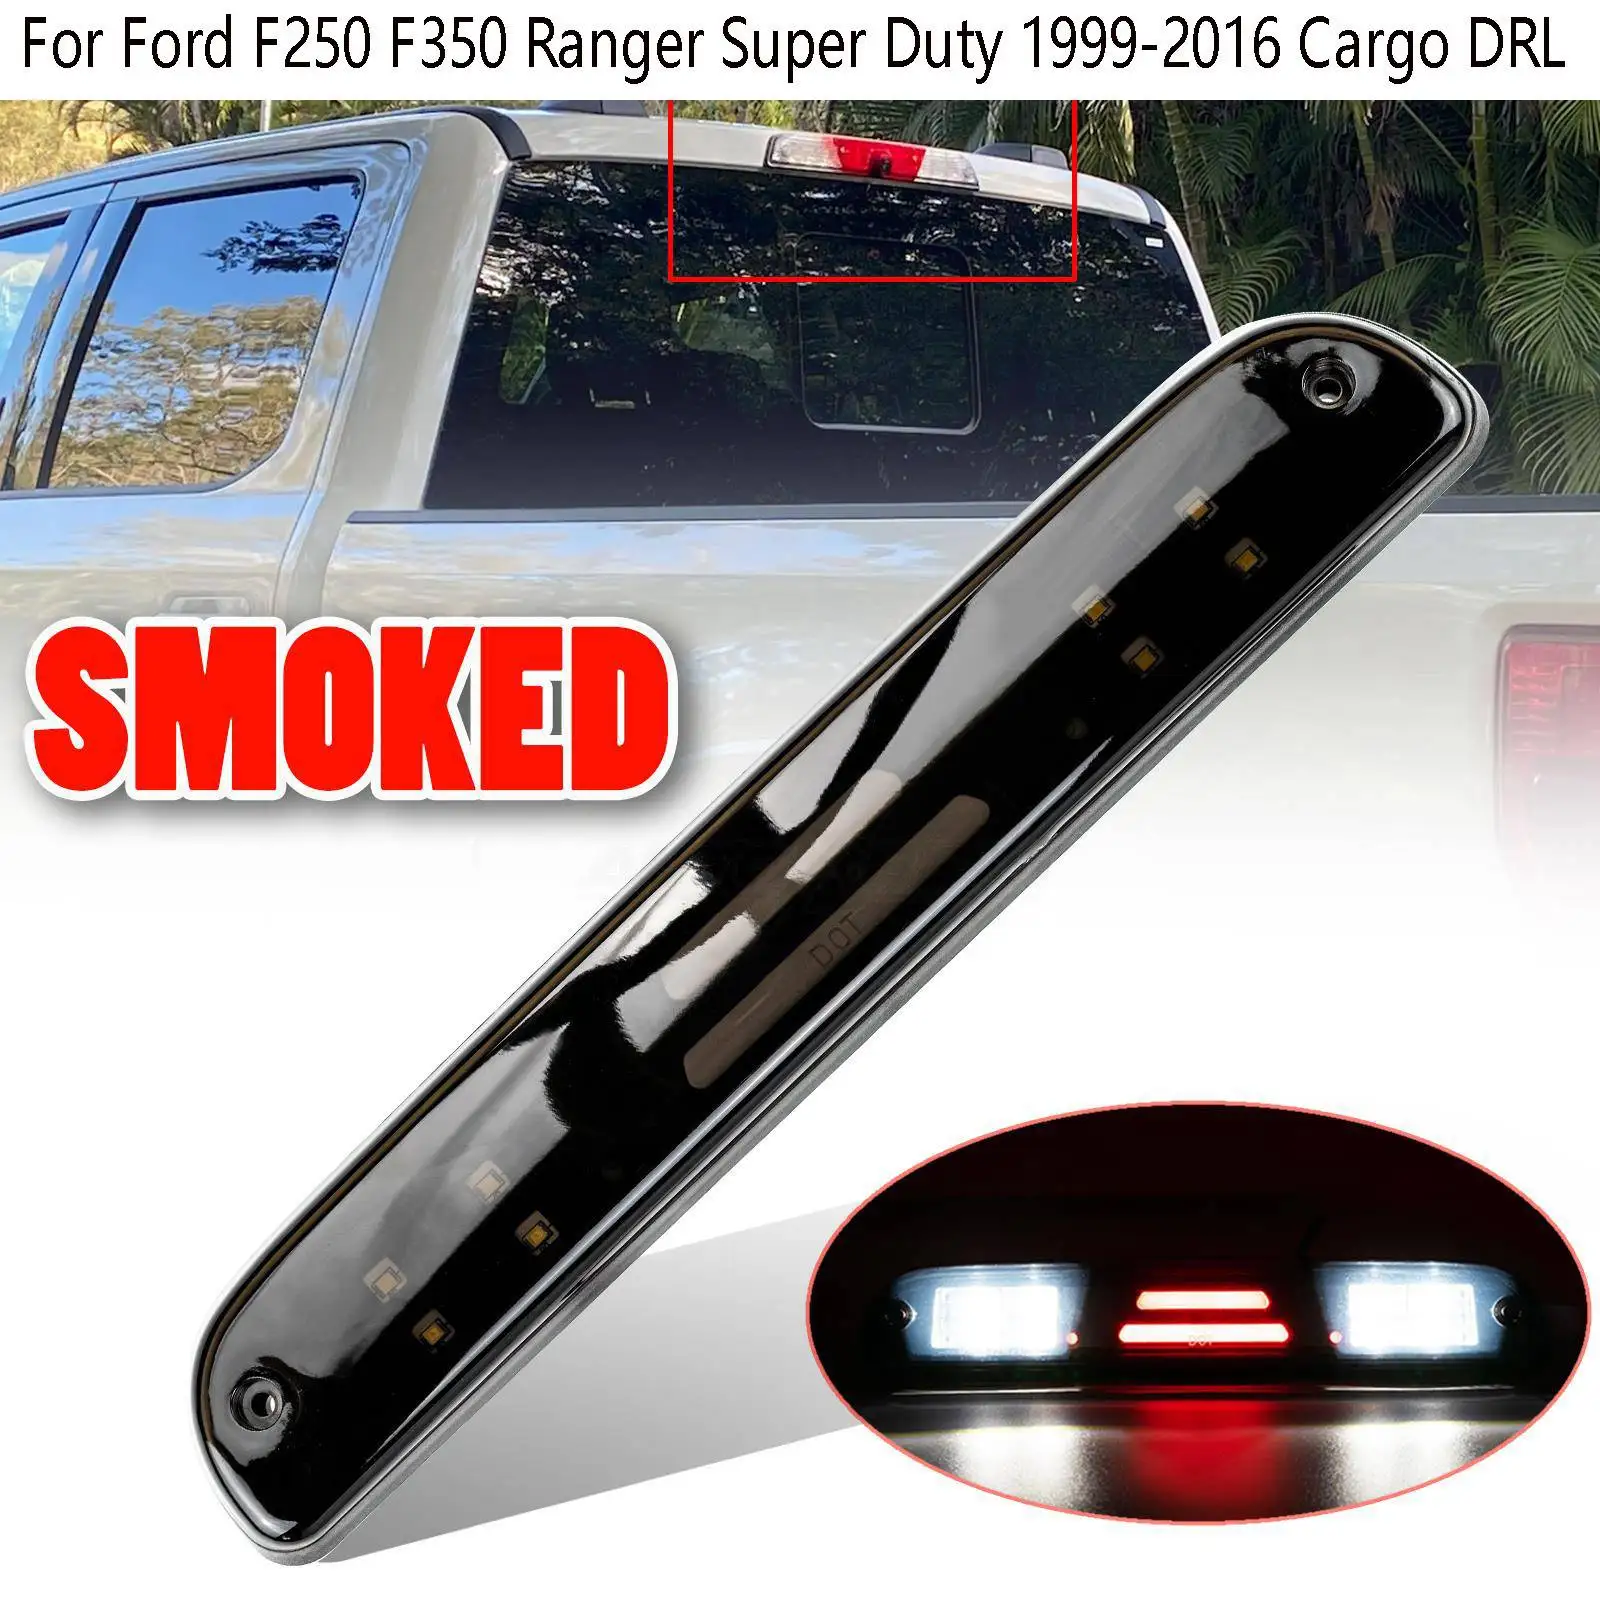 High Mount Brake Stop Light Rear LED Third Smoked Lamp For Ford F250 F350 Ranger Super Duty 1999-2016 Cargo DRL